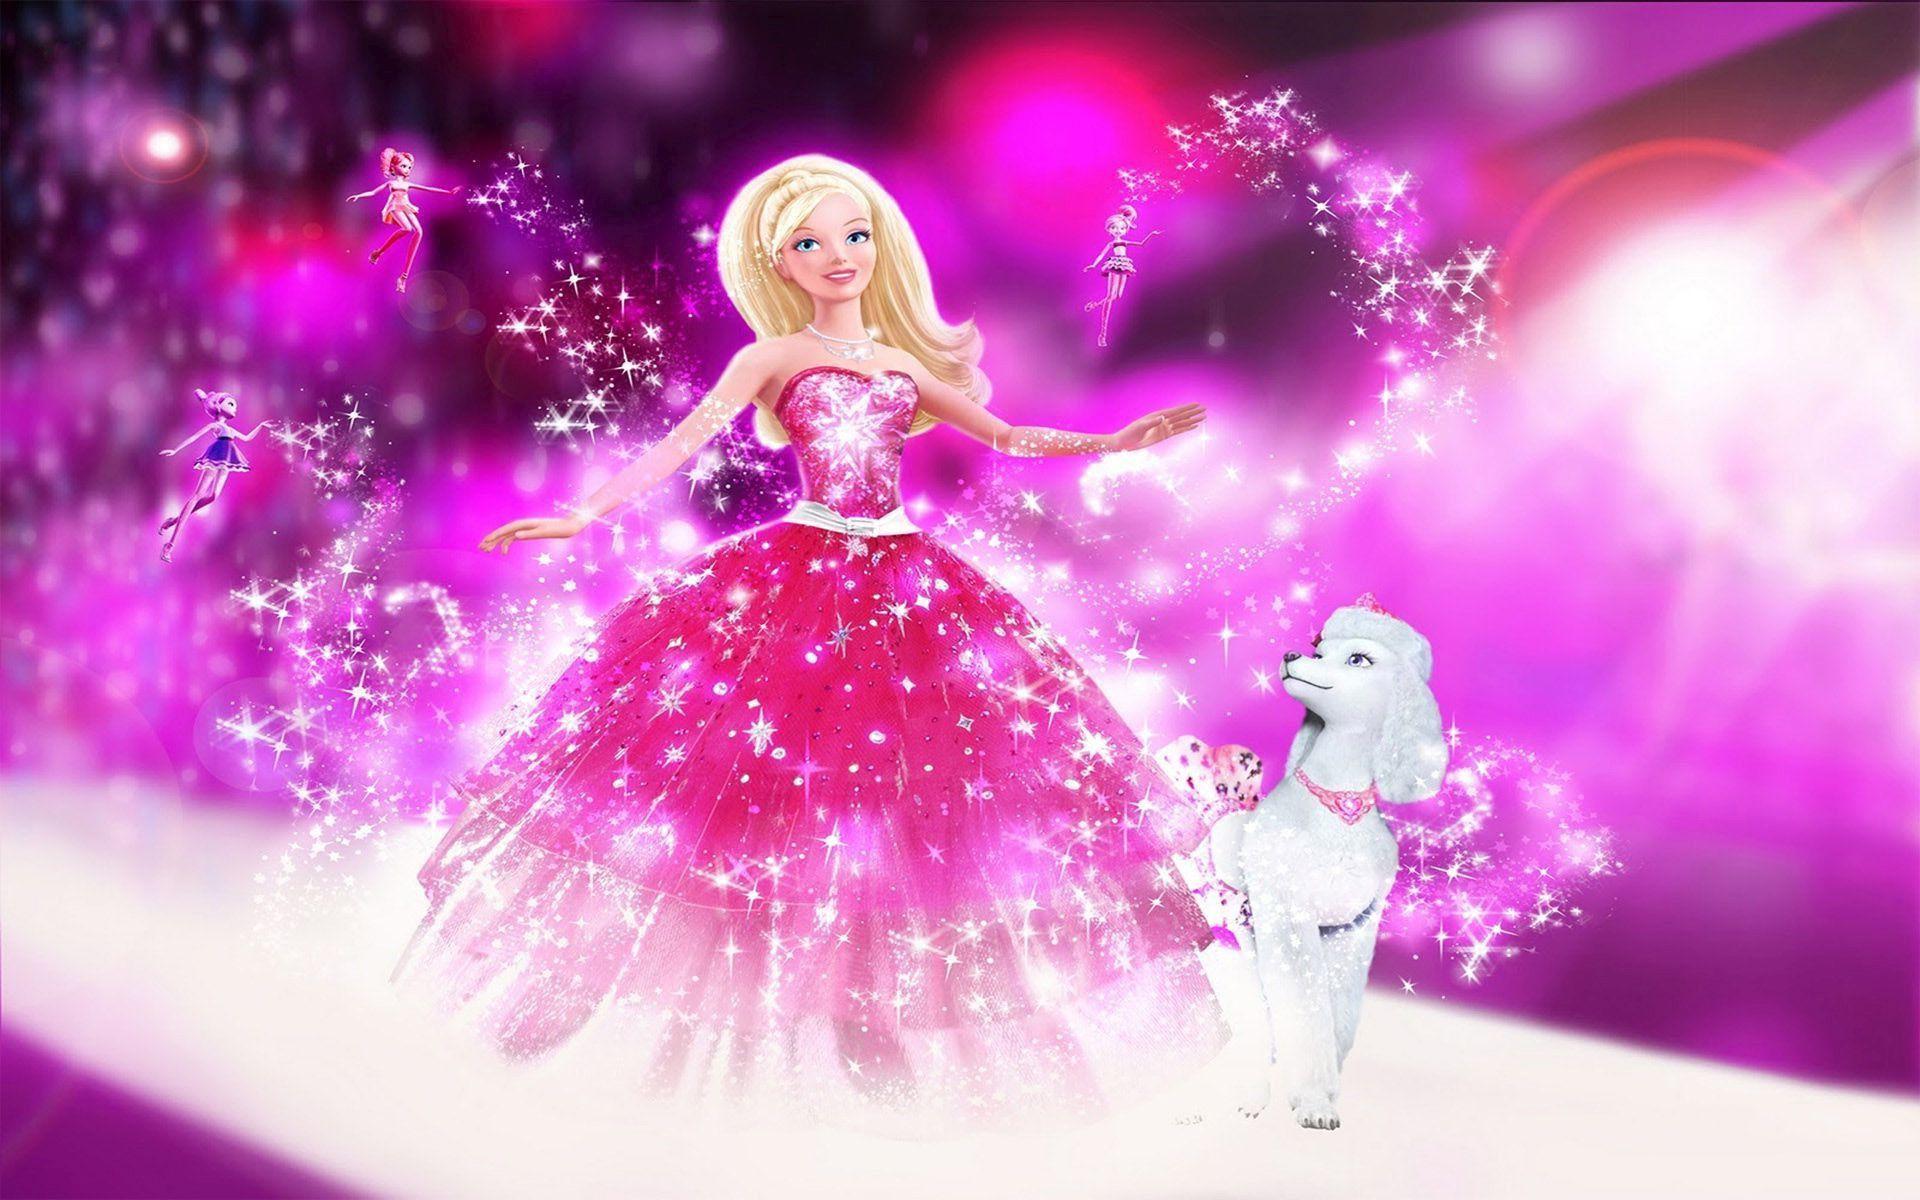 Amazing Cute Barbie Doll Wallpaper Photo For Mobile